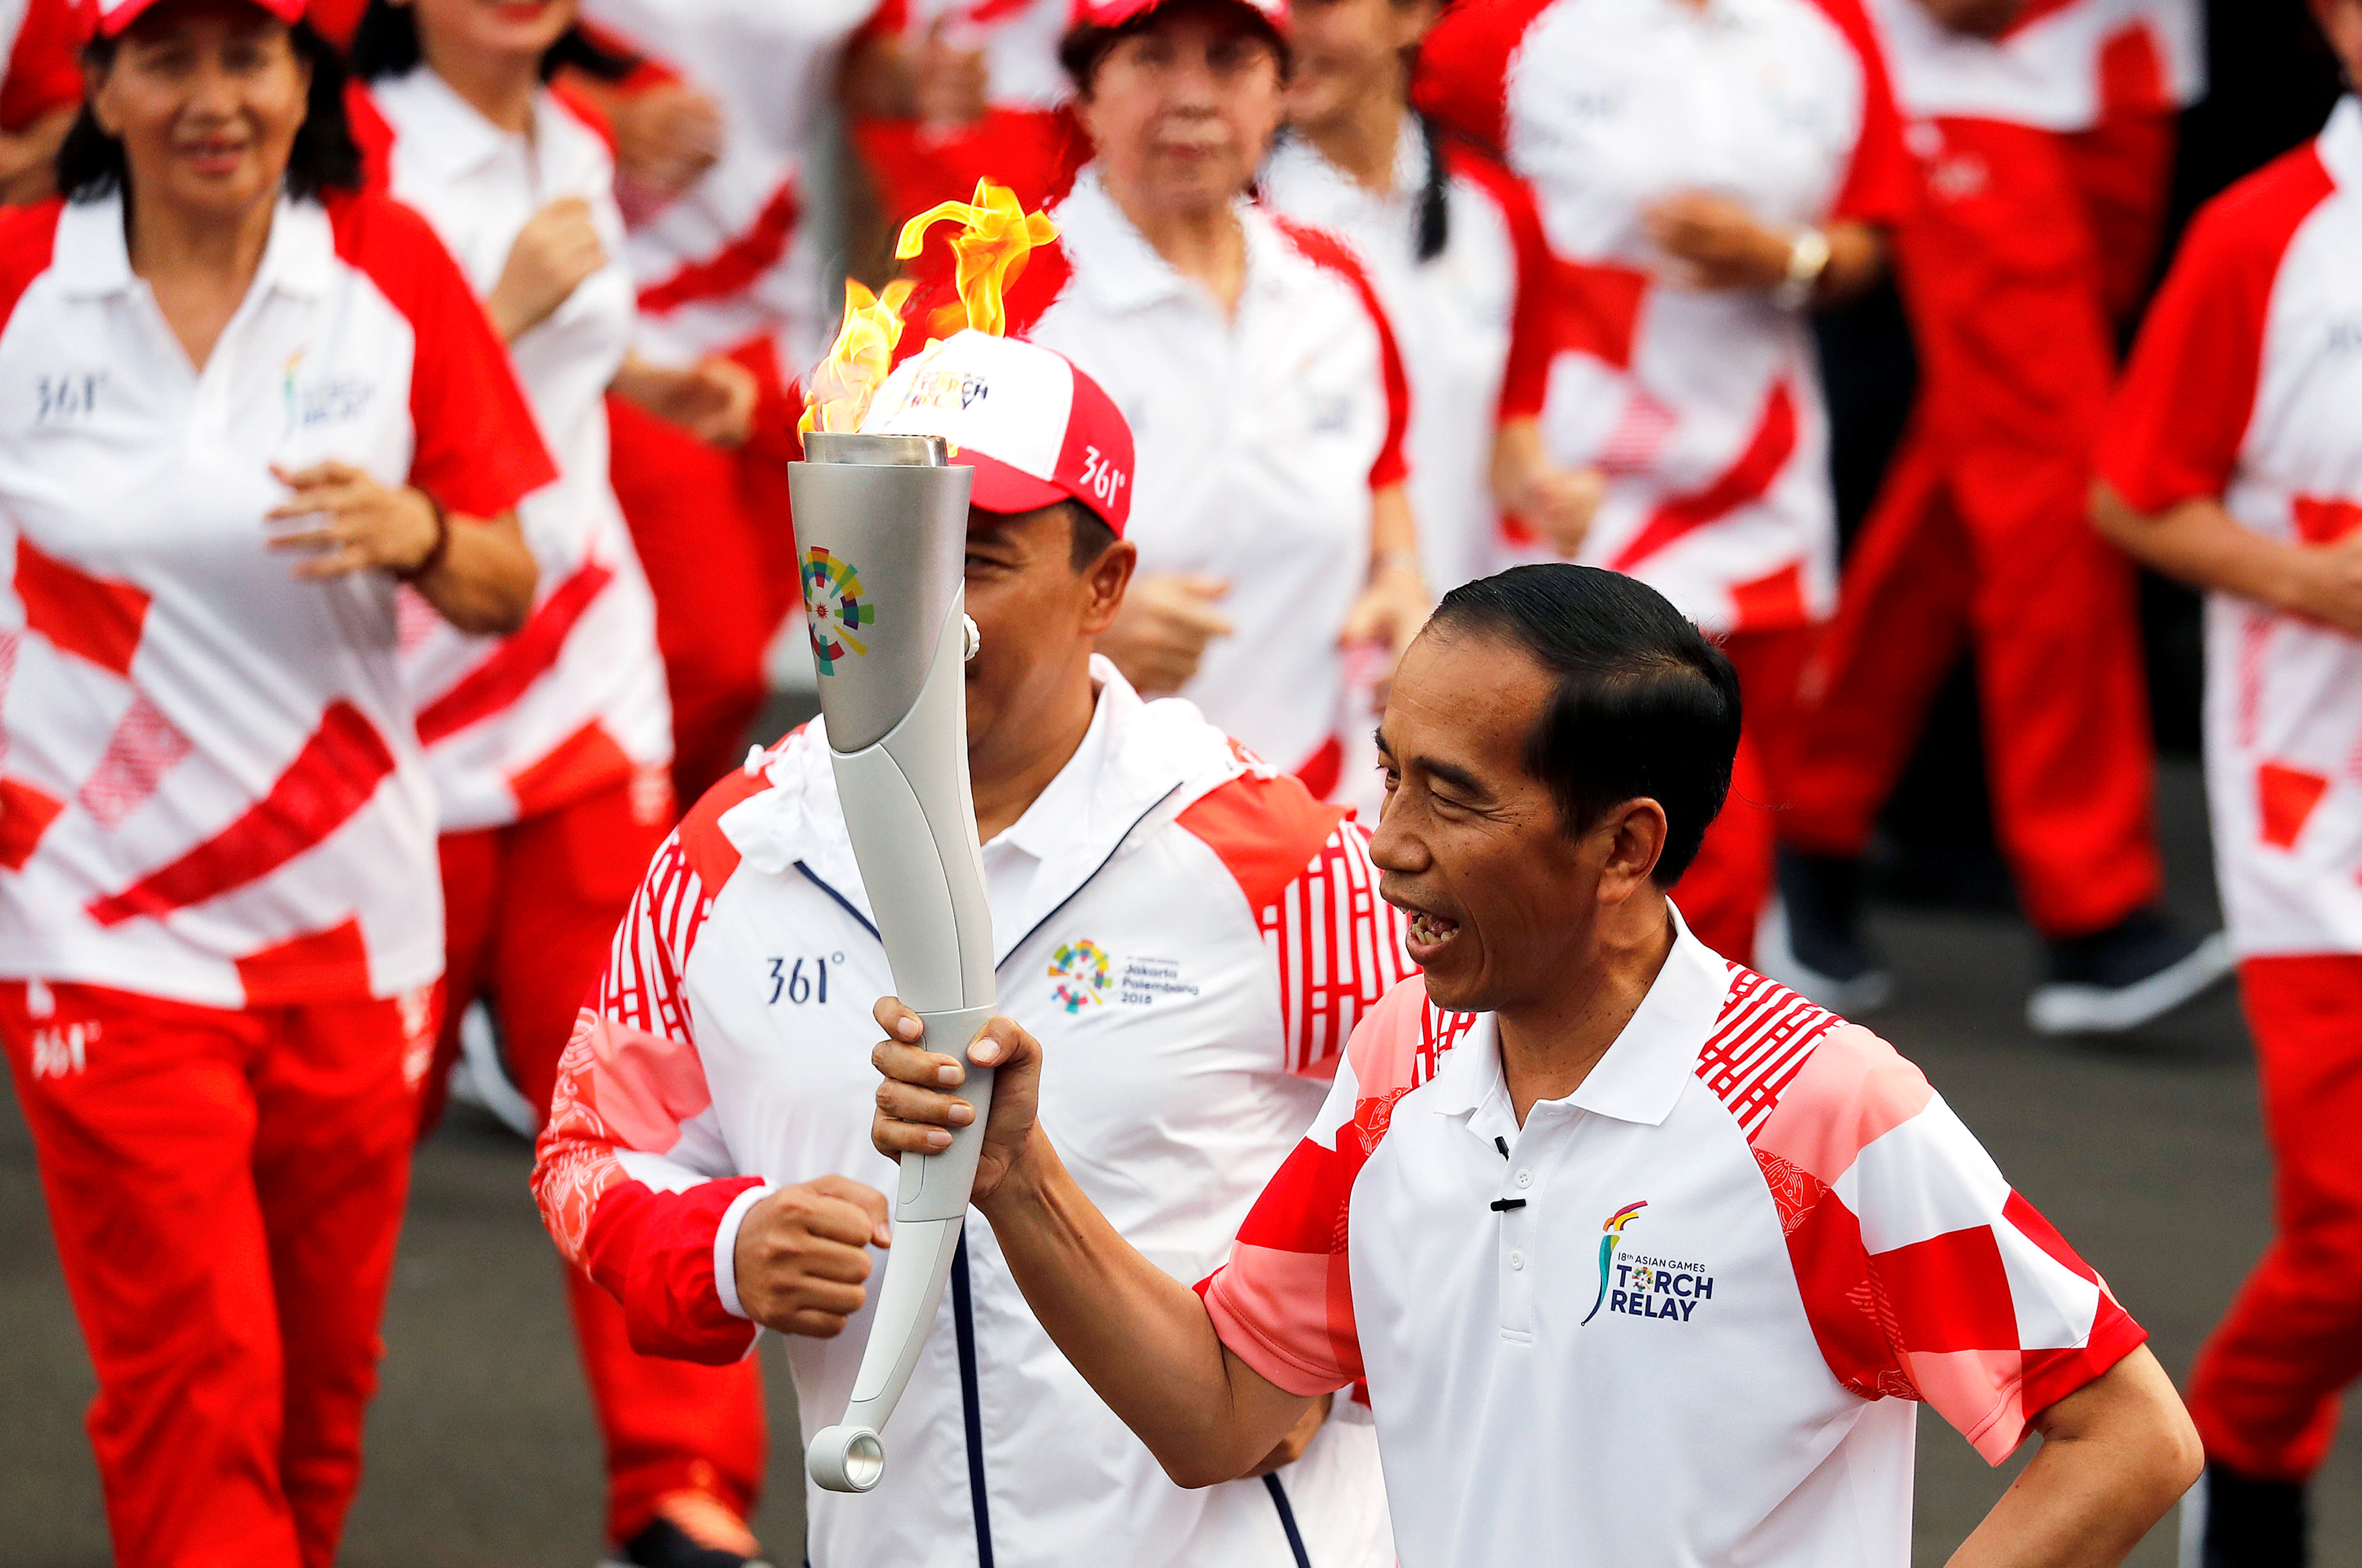 Indonesian President Joko Widodo carries the Asian Games torch at the Asian Games 2018 torch relay ahead of the August 18 - September 2 games held in Jakarta and Palembang, at the presidential palace in Jakarta, Indonesia August 17, 2018. REUTERS